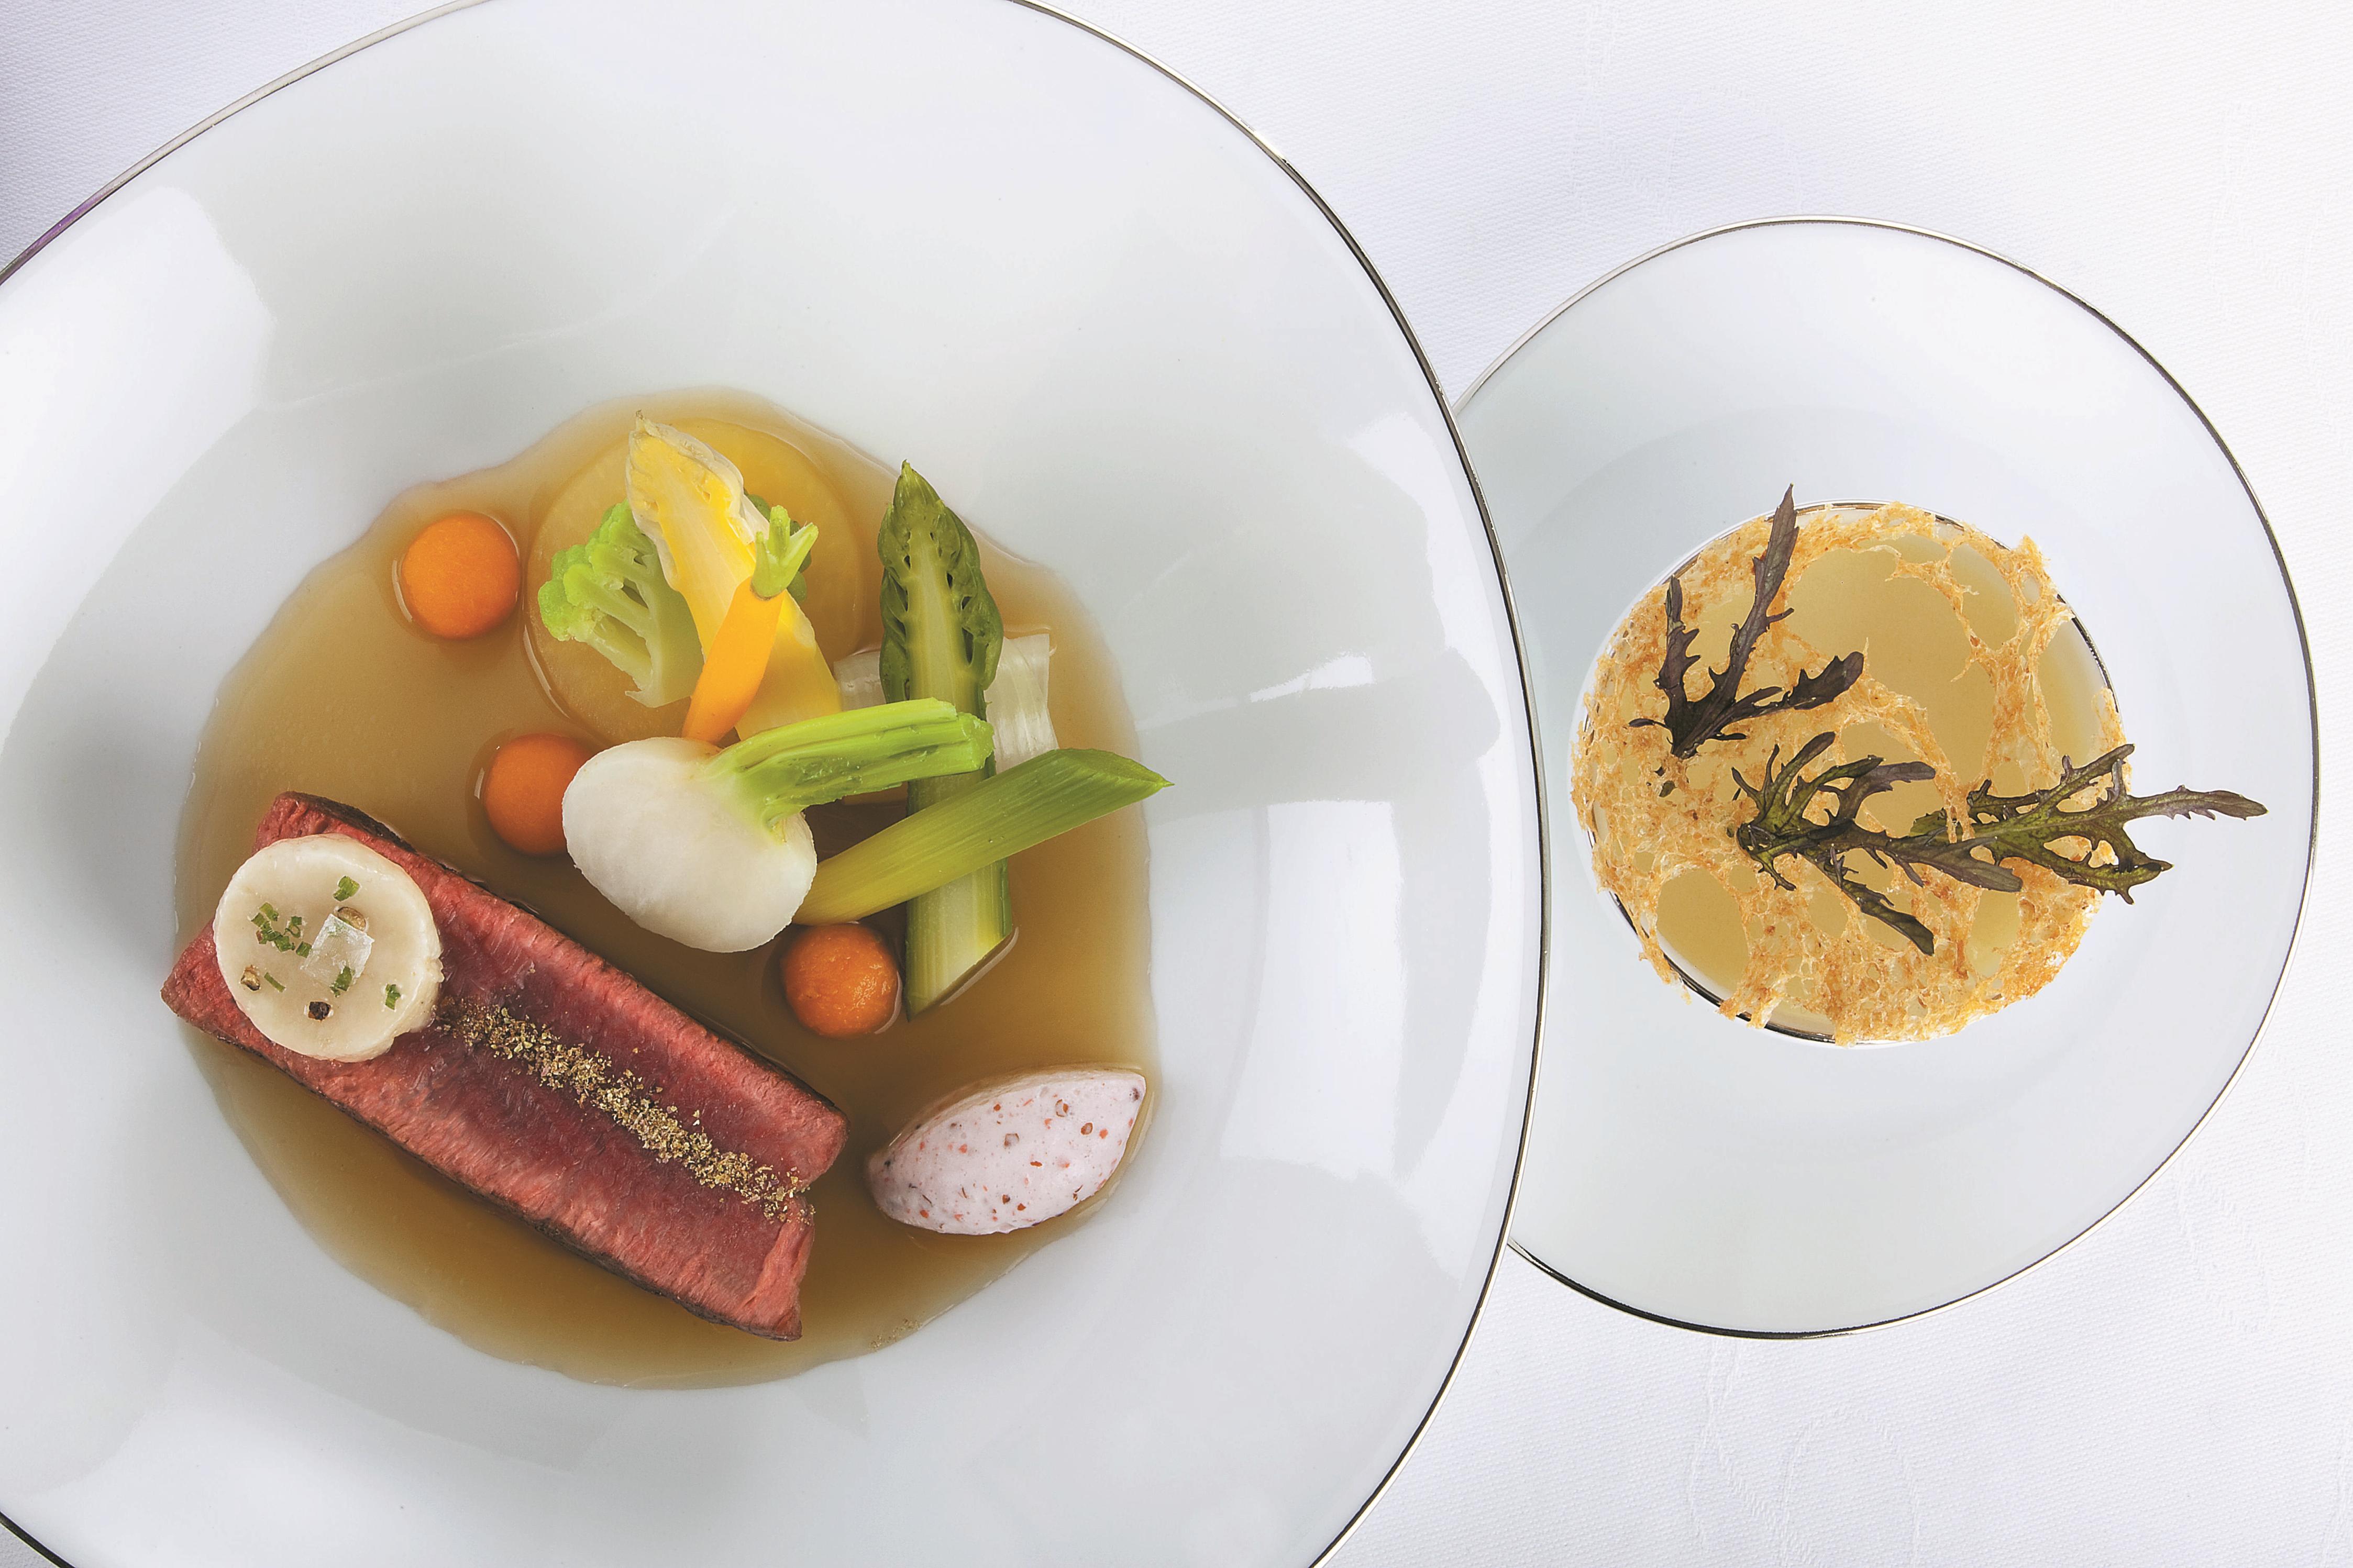 3 Star Michelin – Chef Eric Pras of Maison Lameloise Returns to Normandie